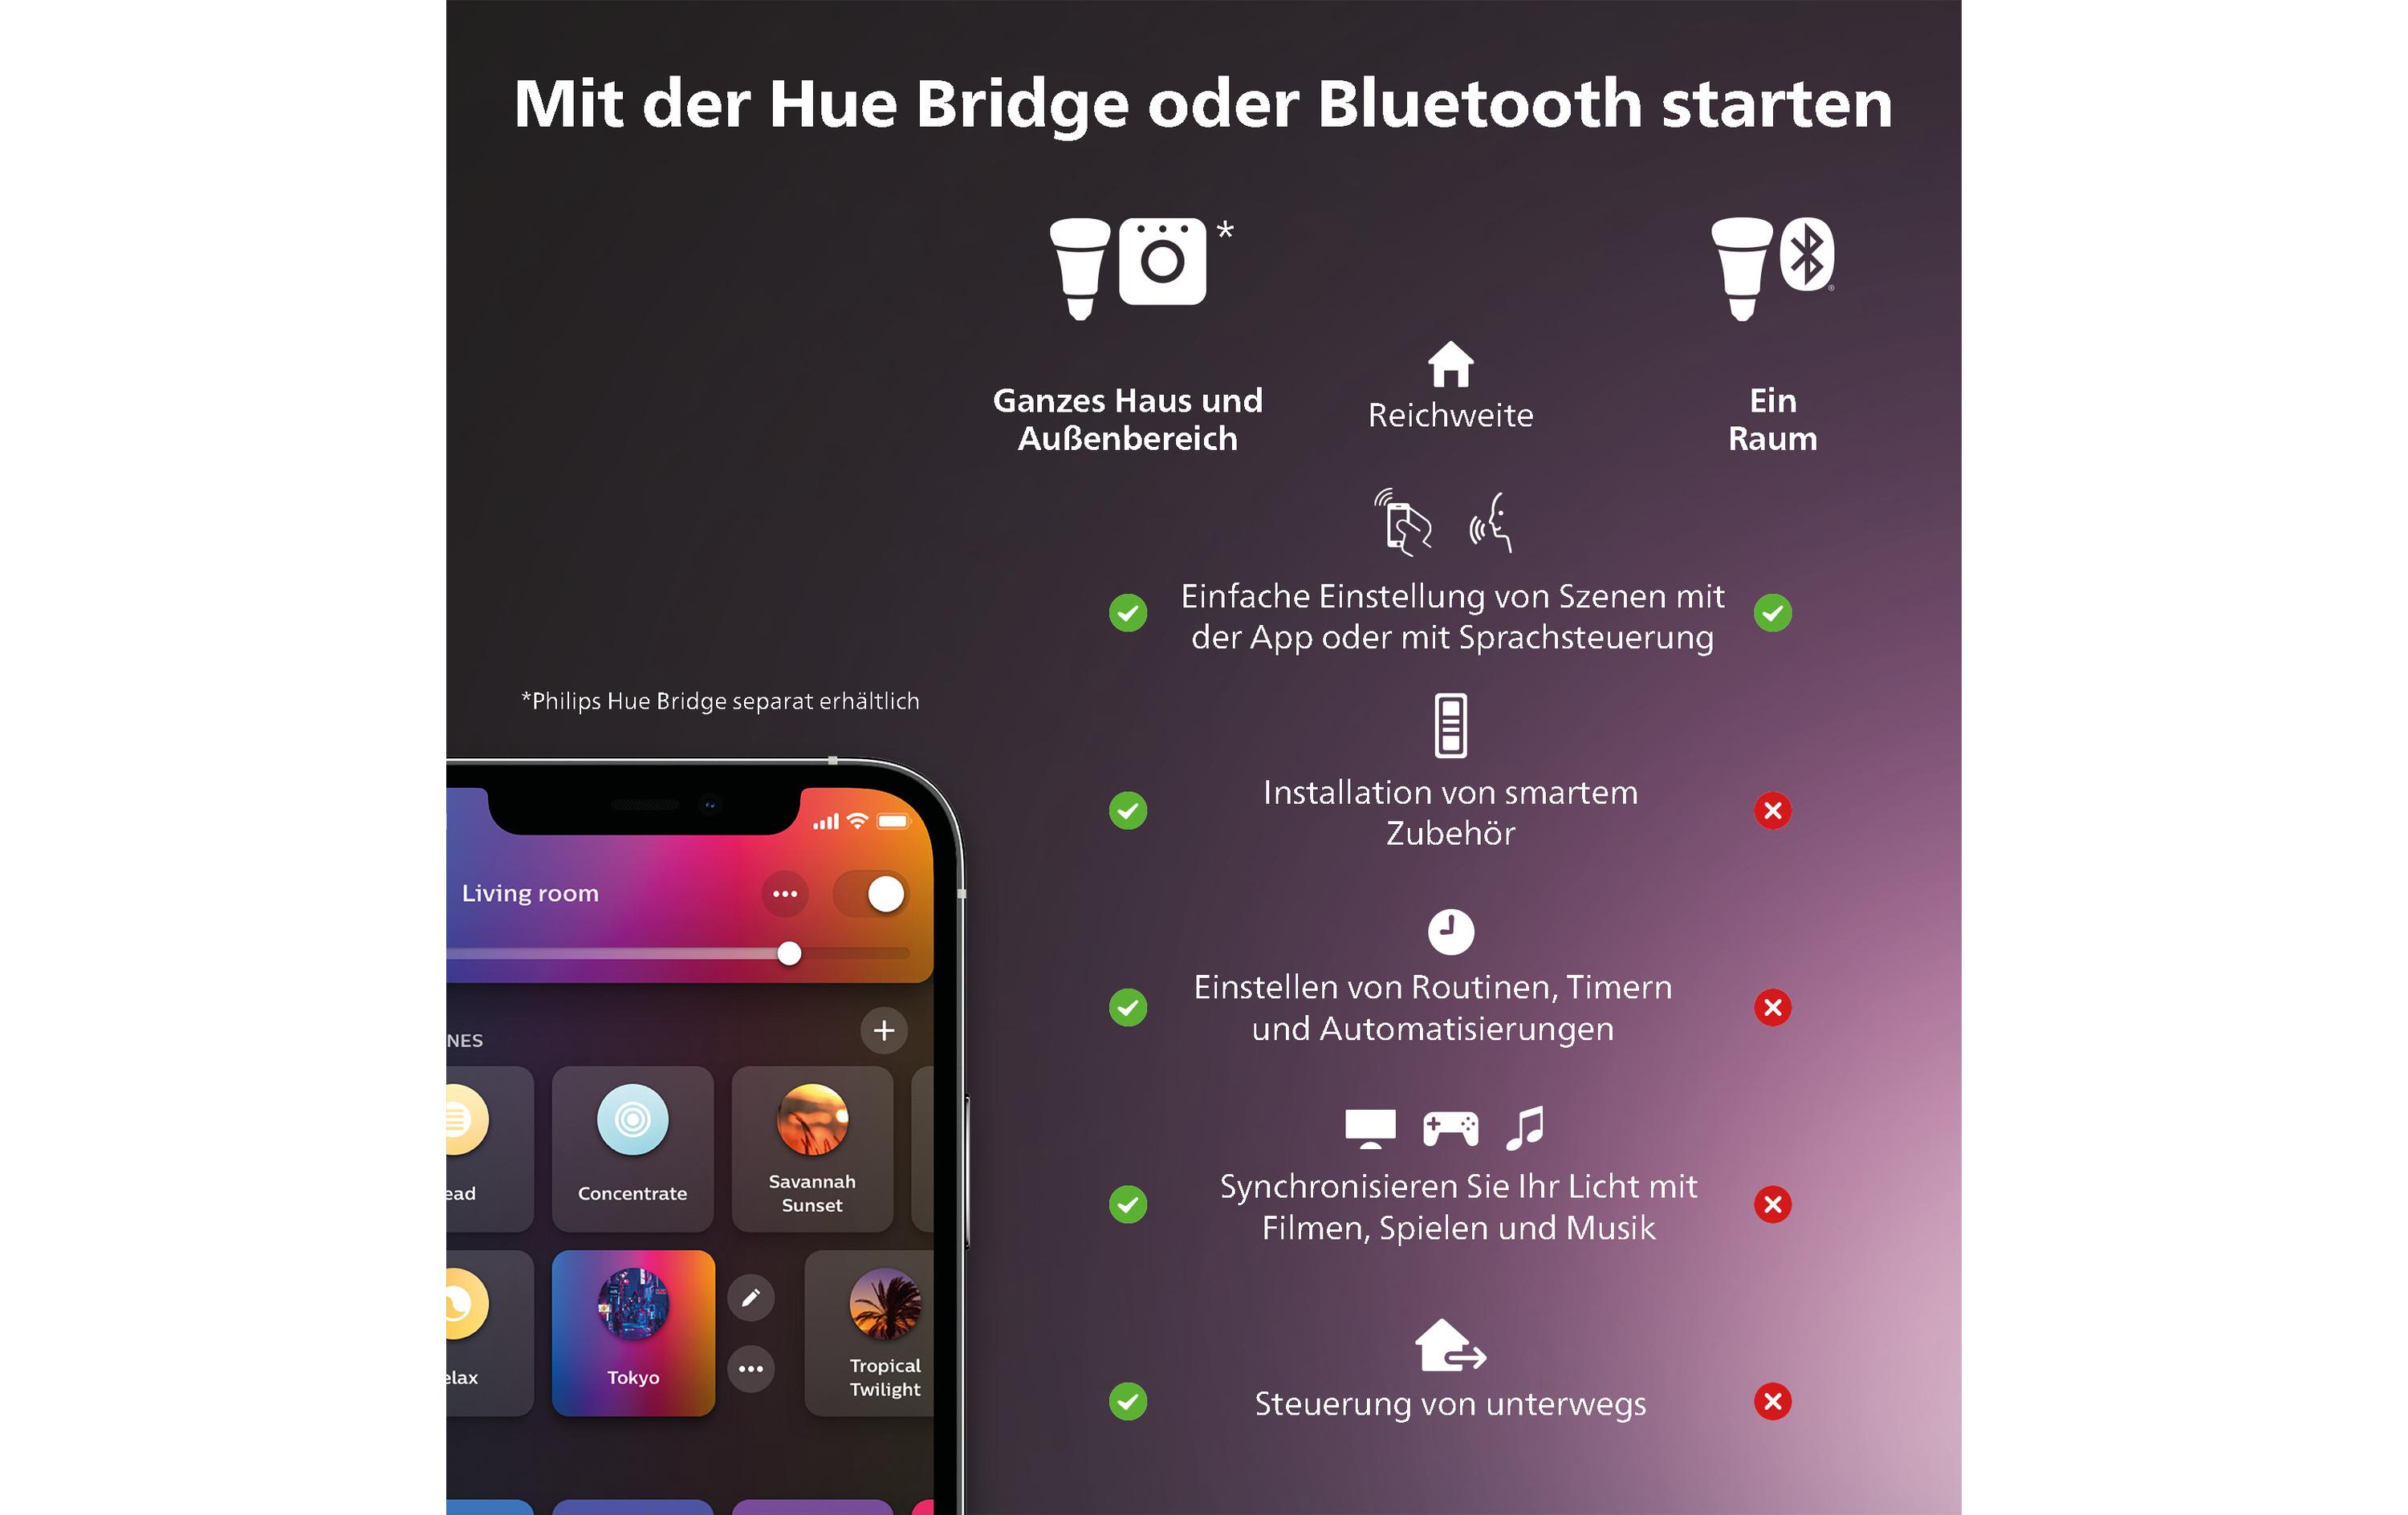 Philips Hue Secure Standfuss, Weiss